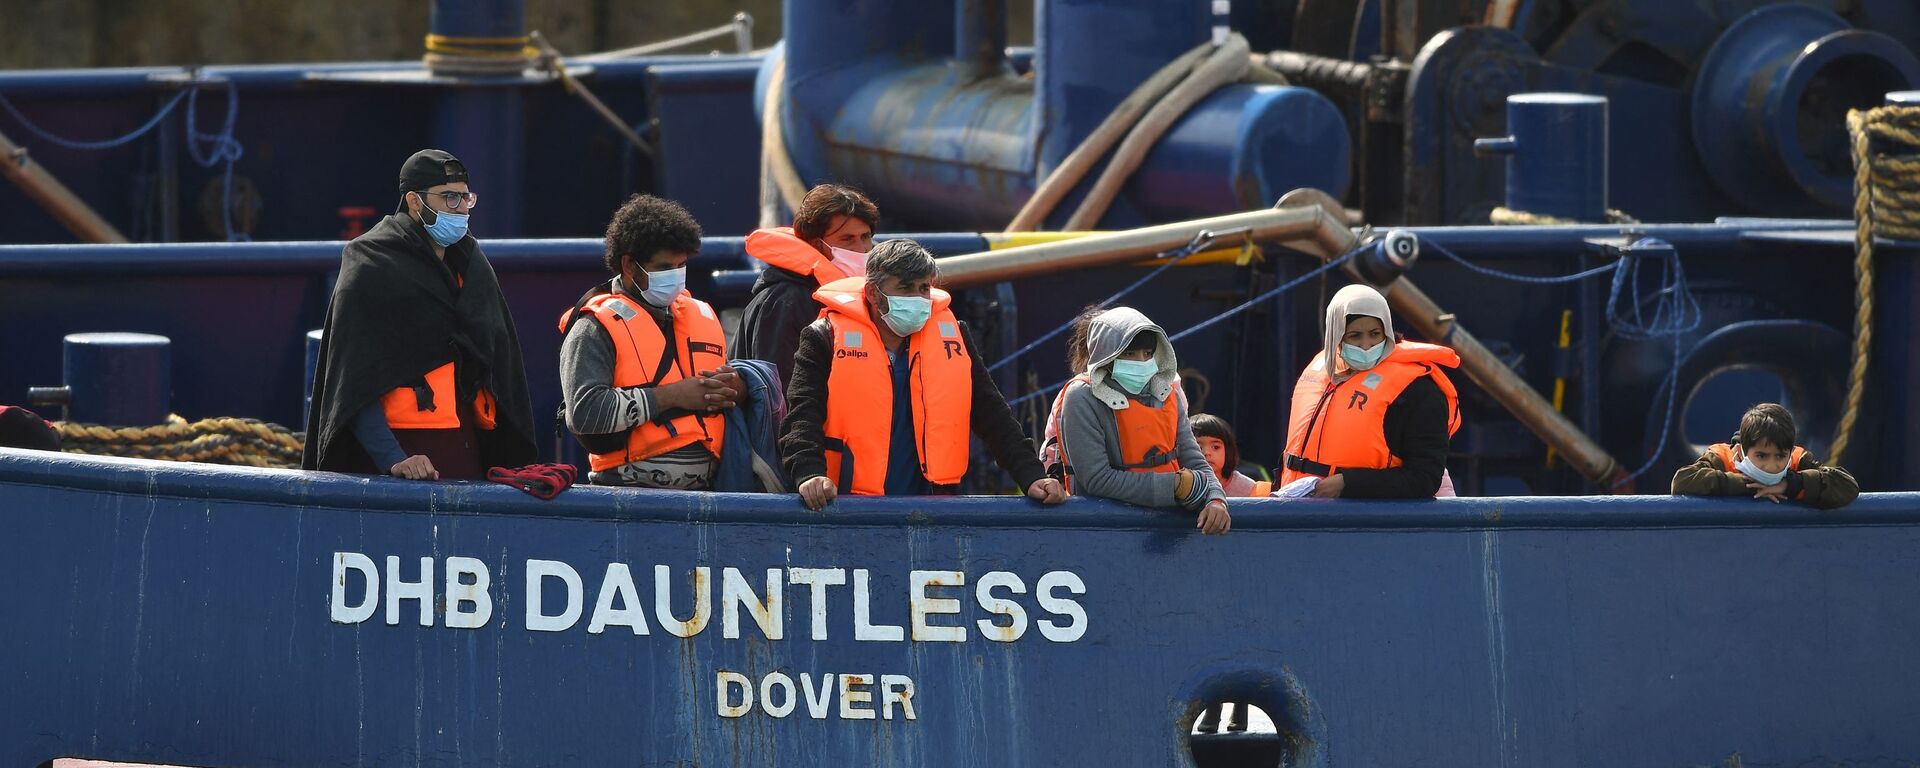 Waleed (3L), 29, a Kuwaiti migrant, stands with other migrants onboard the DHB Dauntless tug boat as they are brought to shore by the UK Border Force after illegally crossing the English Channel from France on a dinghy on September 11, 2020, in the marina at Dover, on the south coast of England - Sputnik International, 1920, 08.07.2023